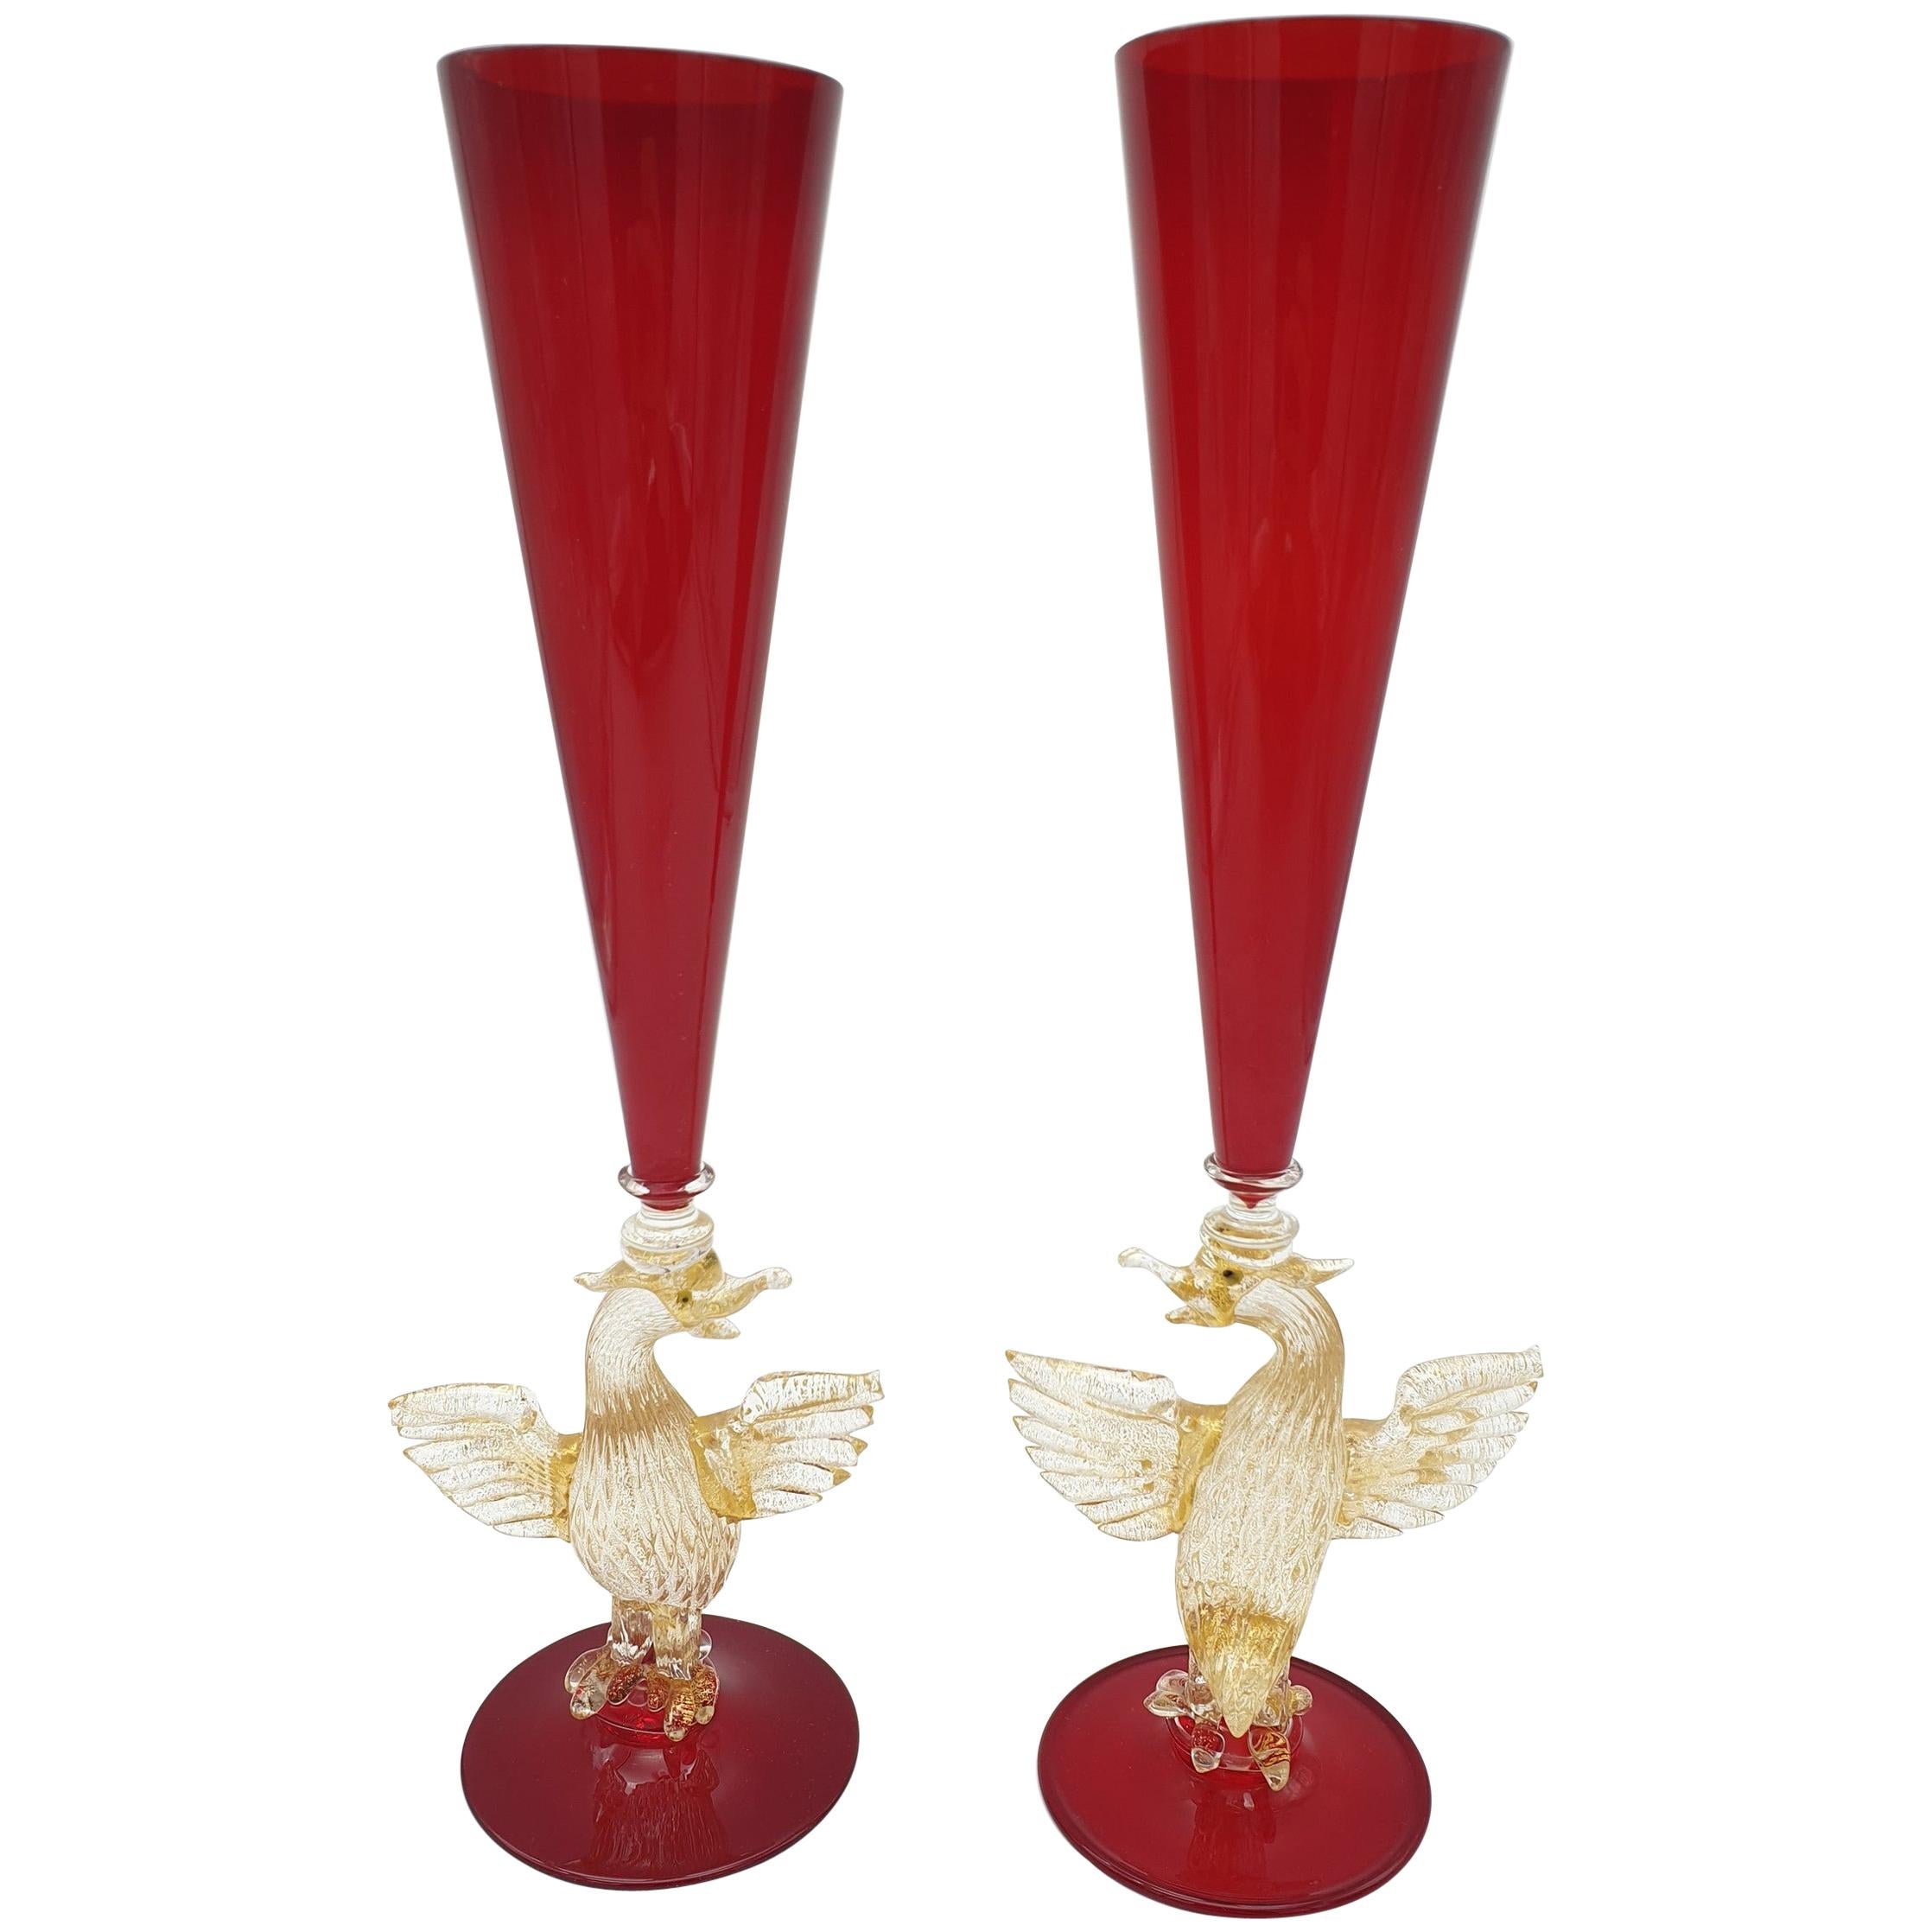 Pair of Modern Murano Glass Red Goblets with Gold Phoenix by Gino Cenedese 1990s For Sale